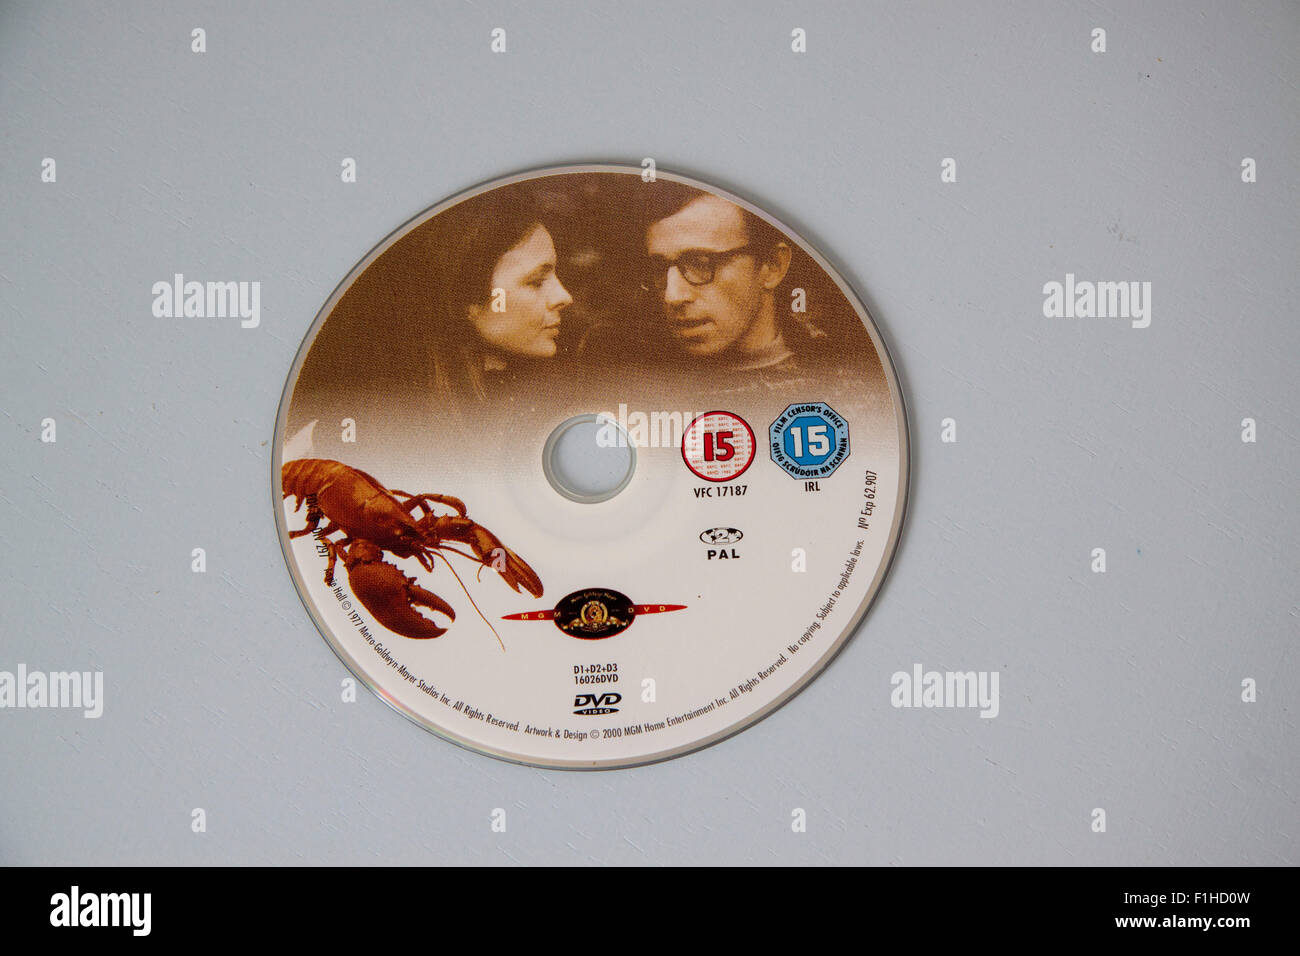 Dvd disc/disk for the Woody Allen film Annie Hall Stock Photo